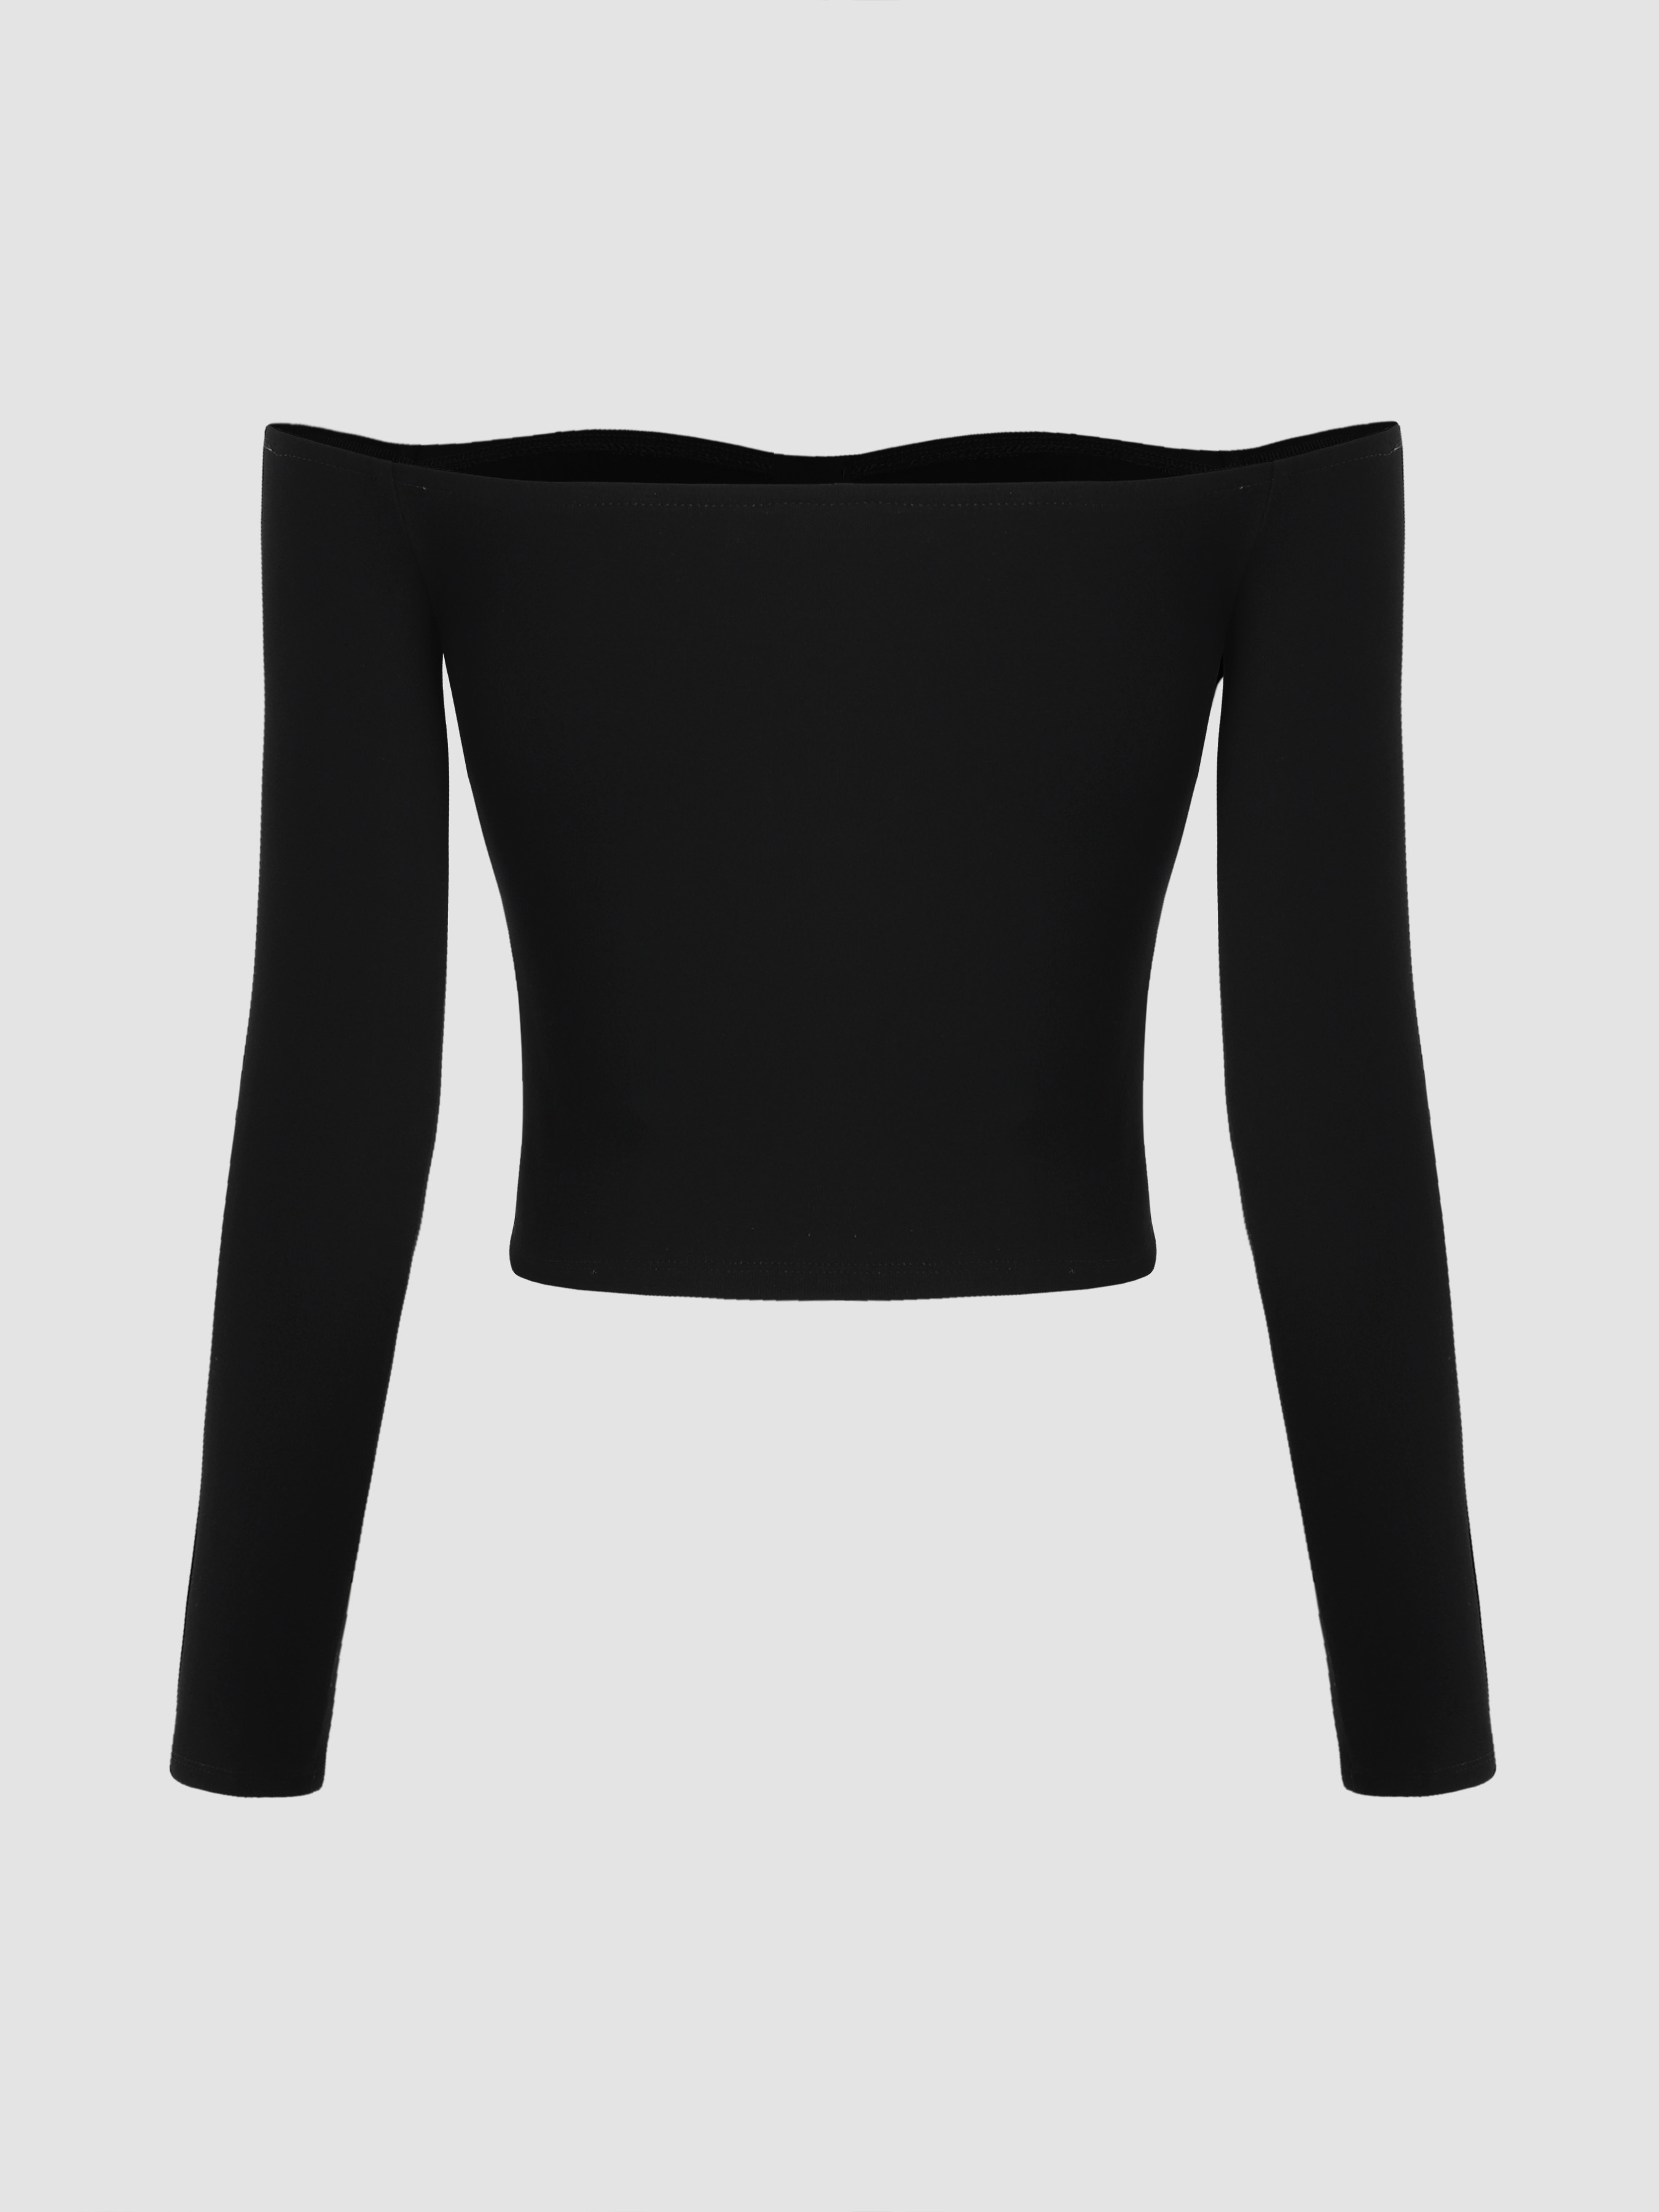 FREE SHIPPING Blouse Off Shoulder Button Long Sleeve White Black